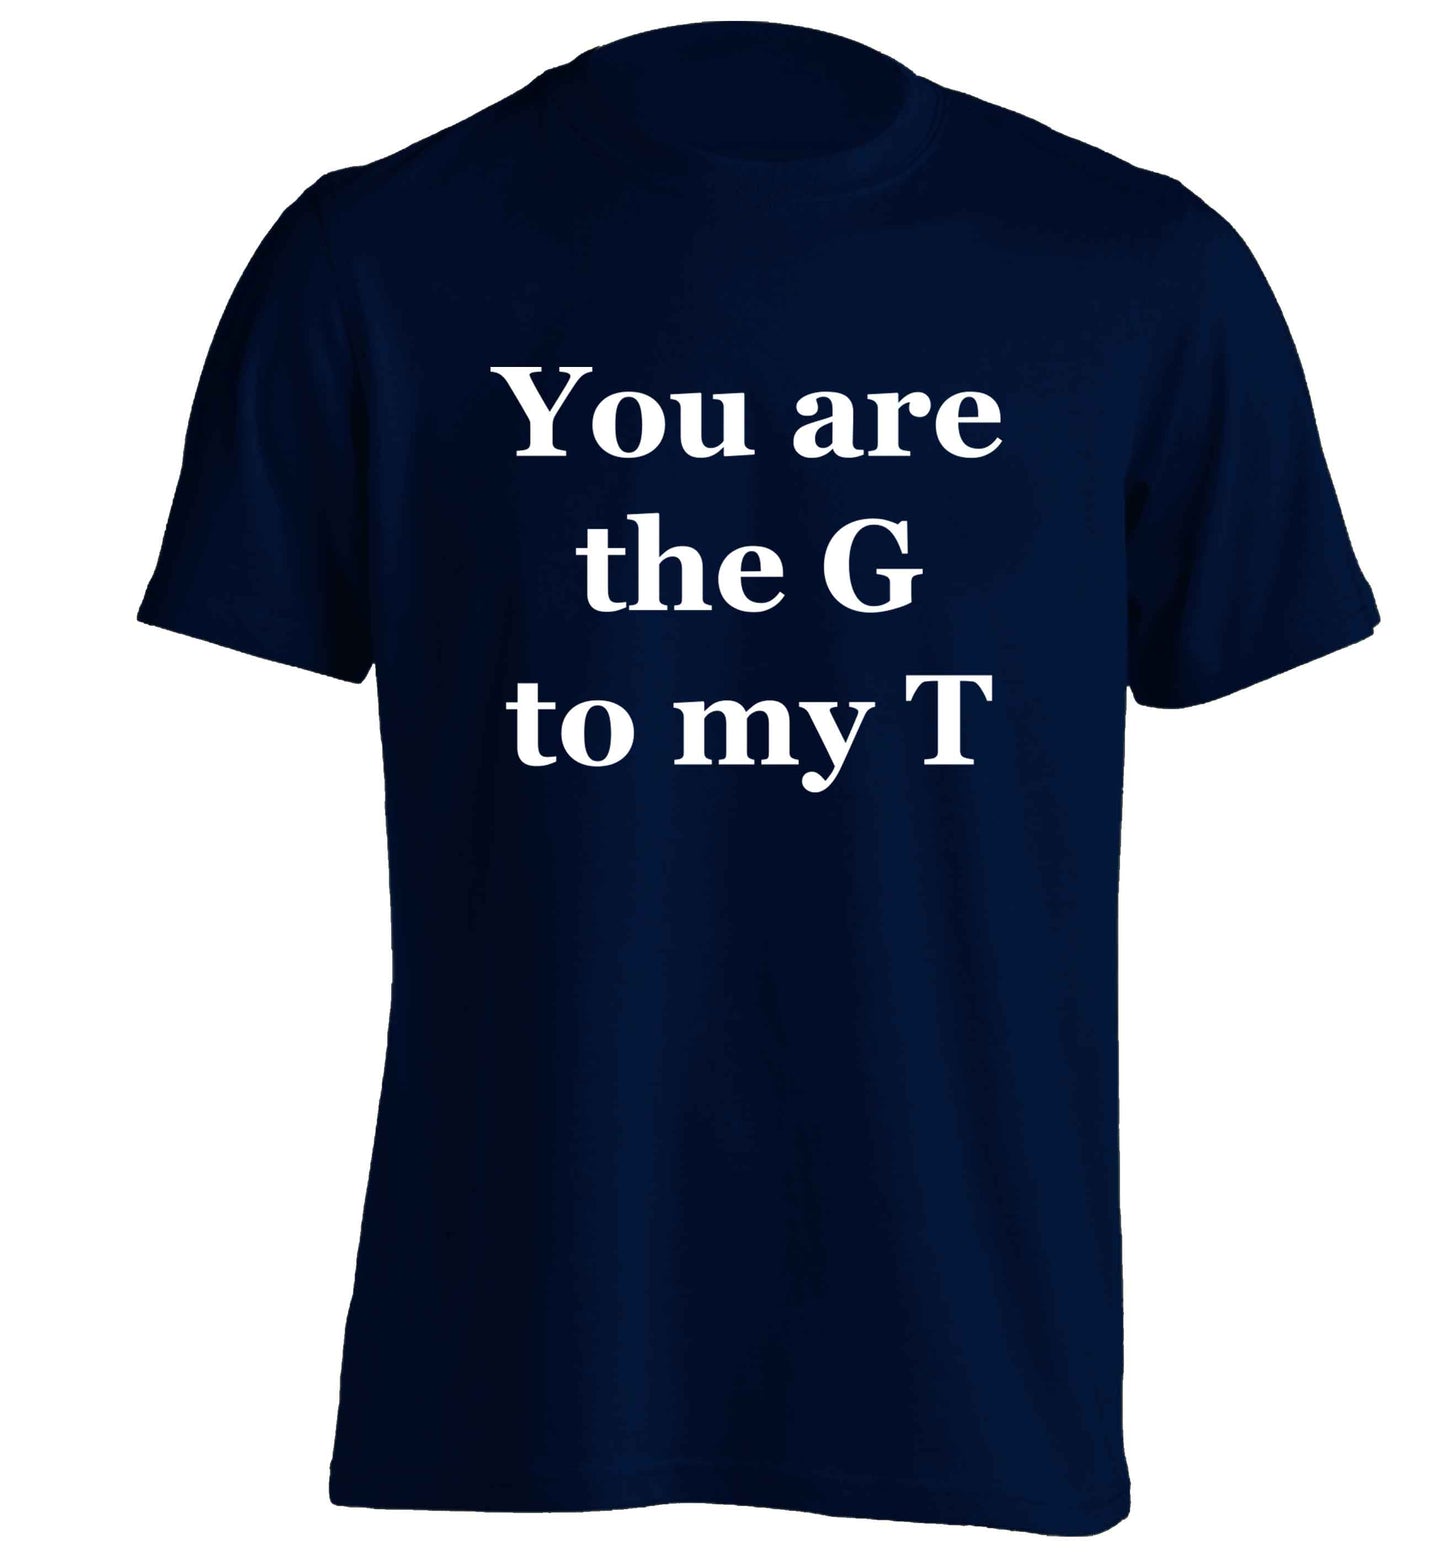 You are the G to my T adults unisex navy Tshirt 2XL